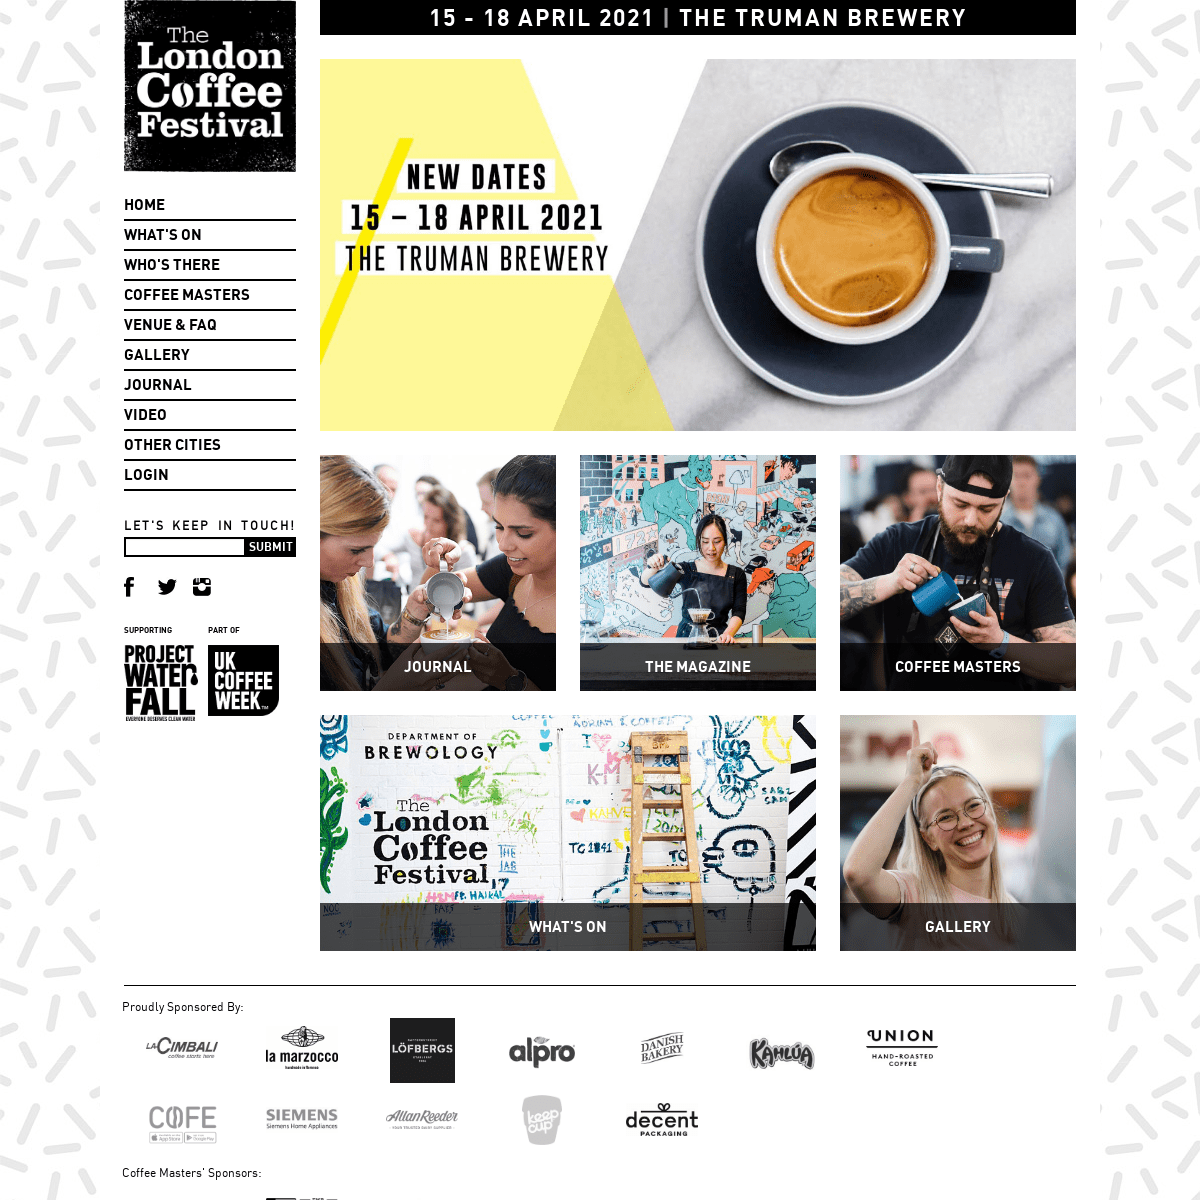 A complete backup of londoncoffeefestival.com